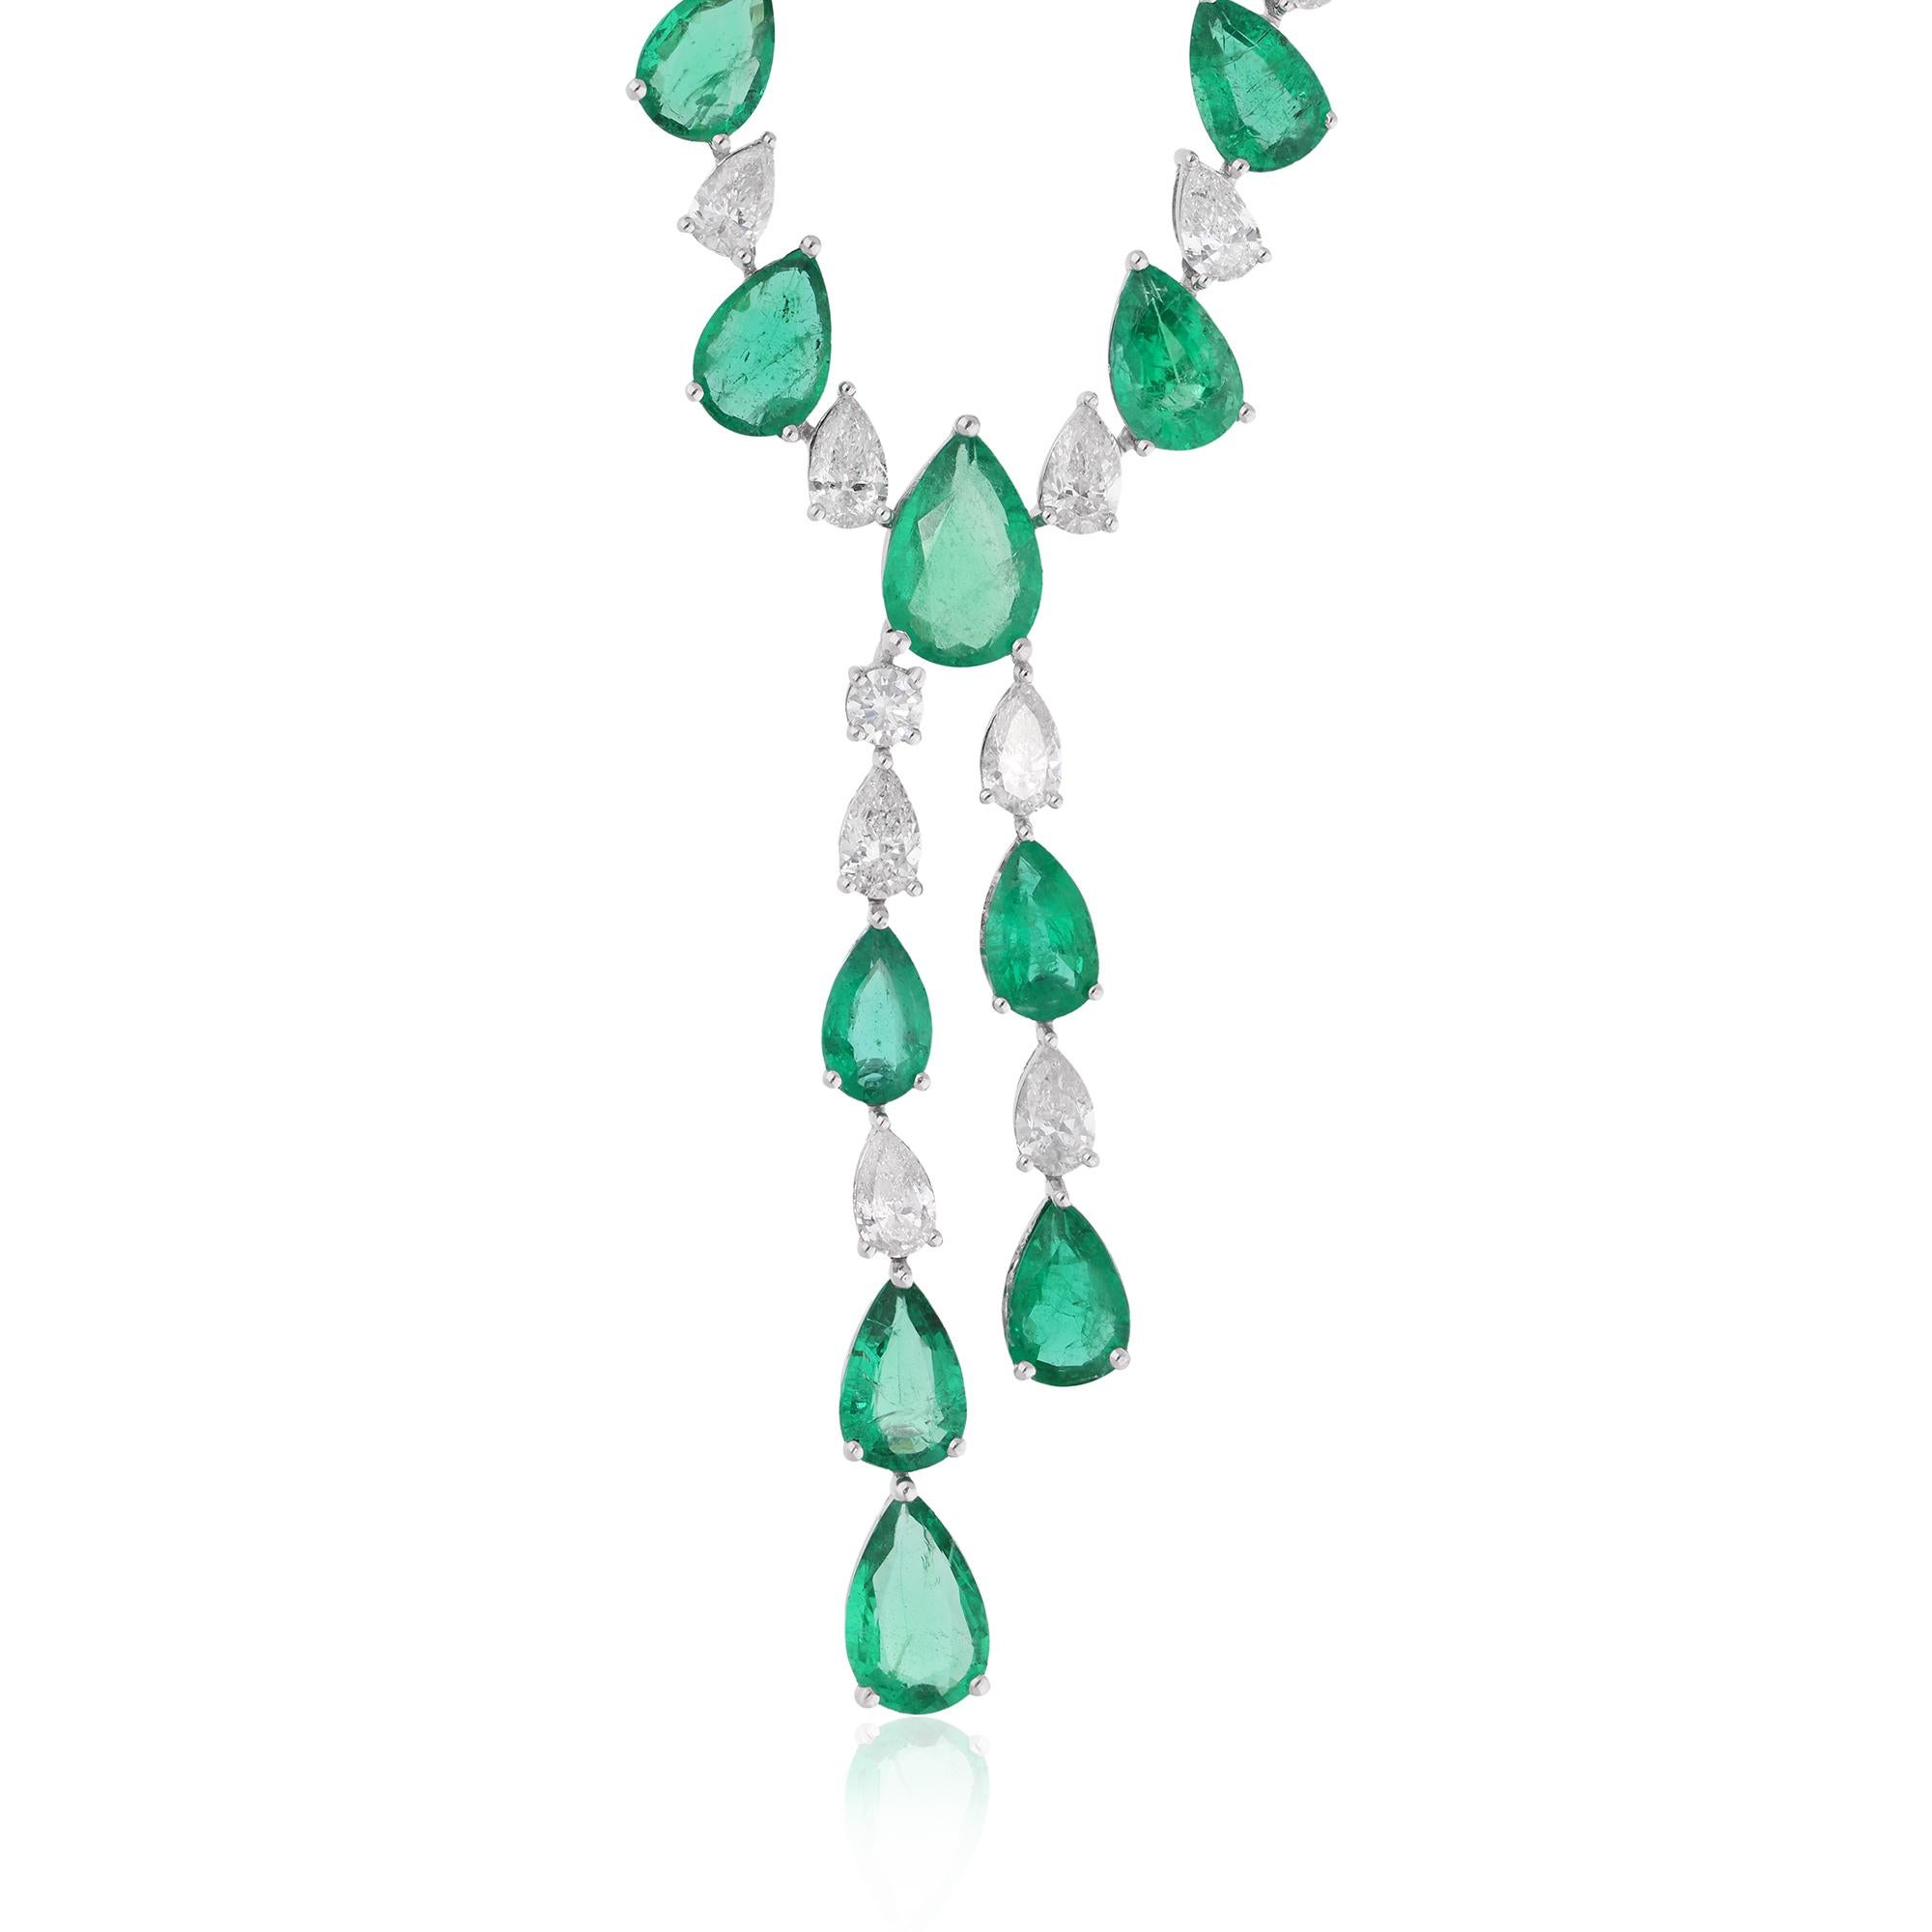 At the heart of this exquisite necklace lies a magnificent pear-shaped Zambian Emerald, renowned for its rich green hue and captivating brilliance. Mined from the renowned emerald mines of Zambia, this gemstone is a true treasure of nature,